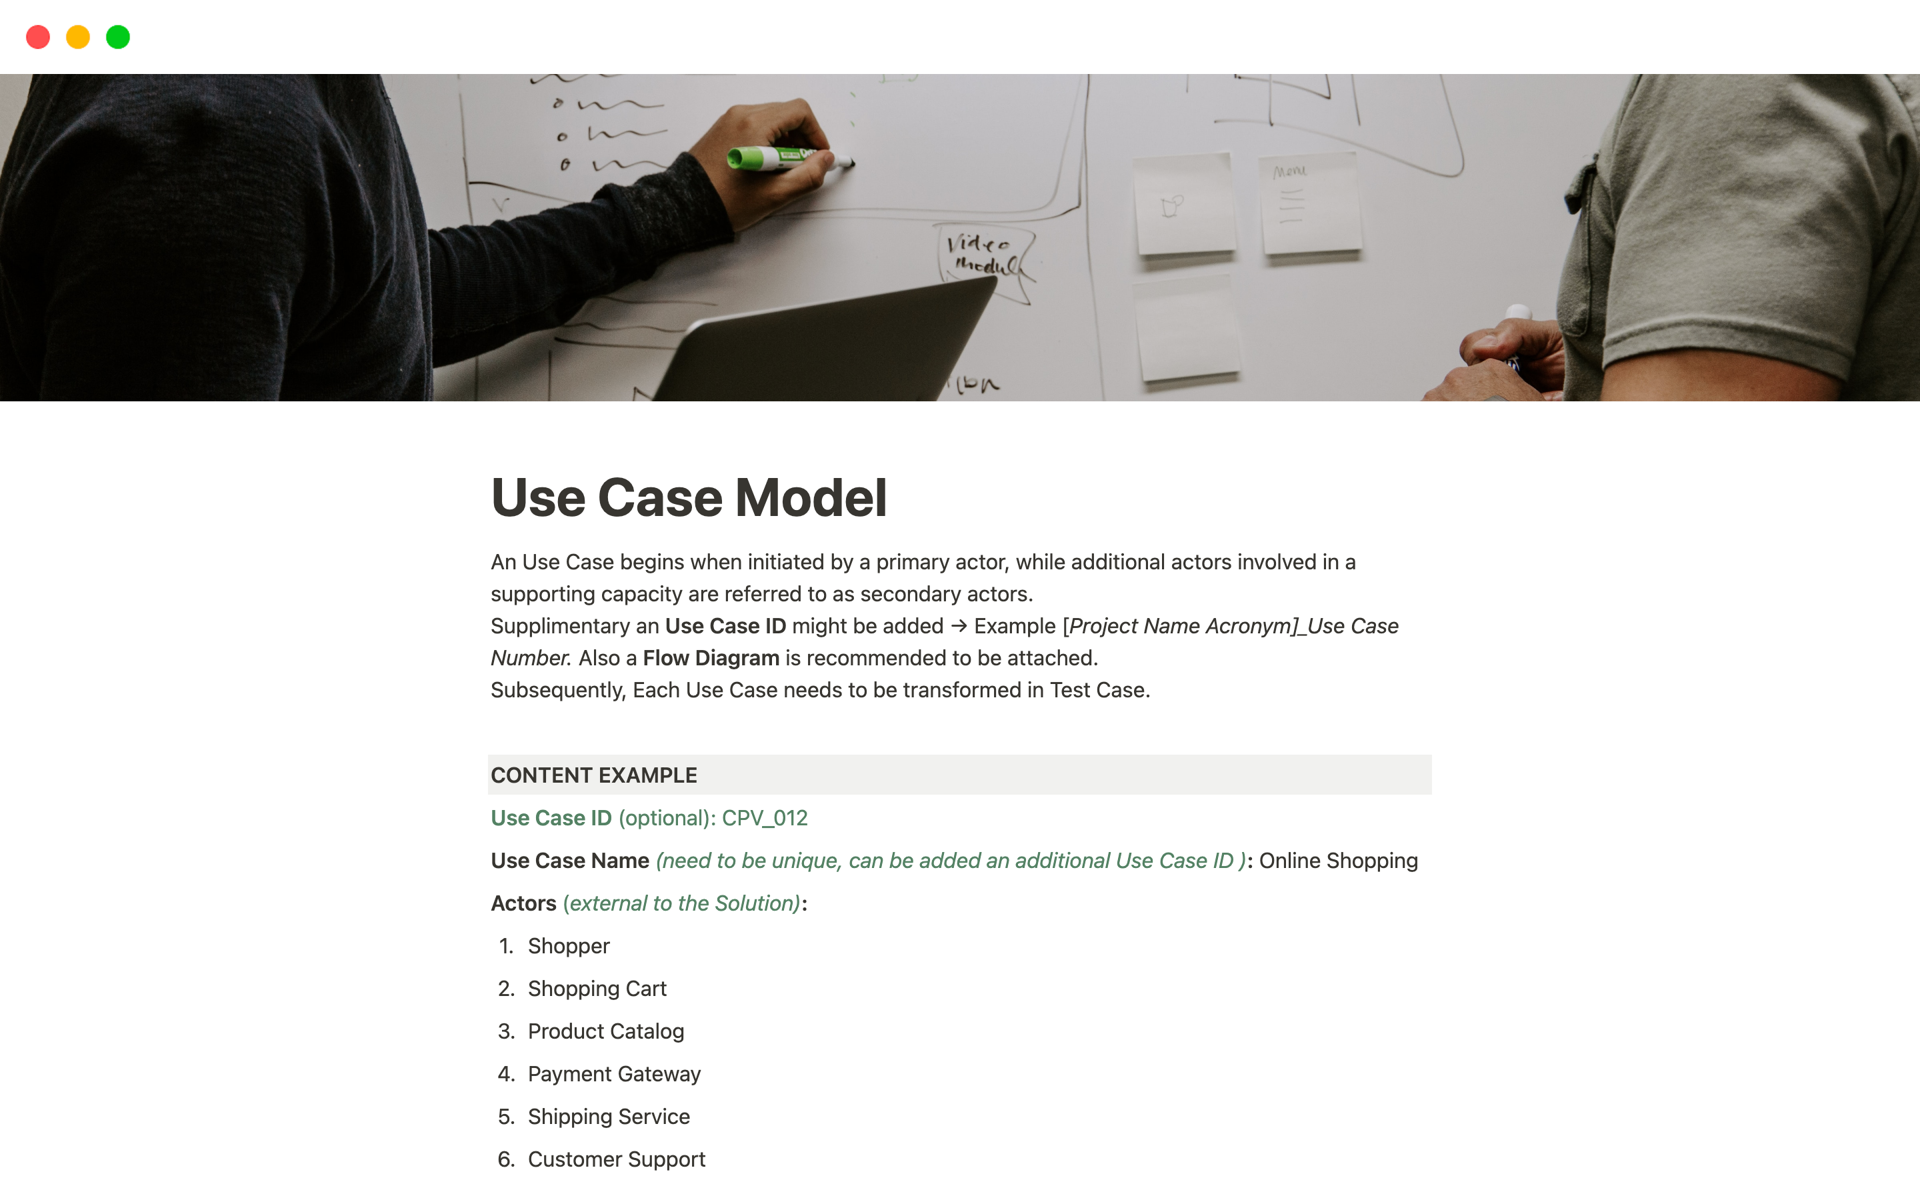 This is a standardised template of use cases which is useful in all business industries.